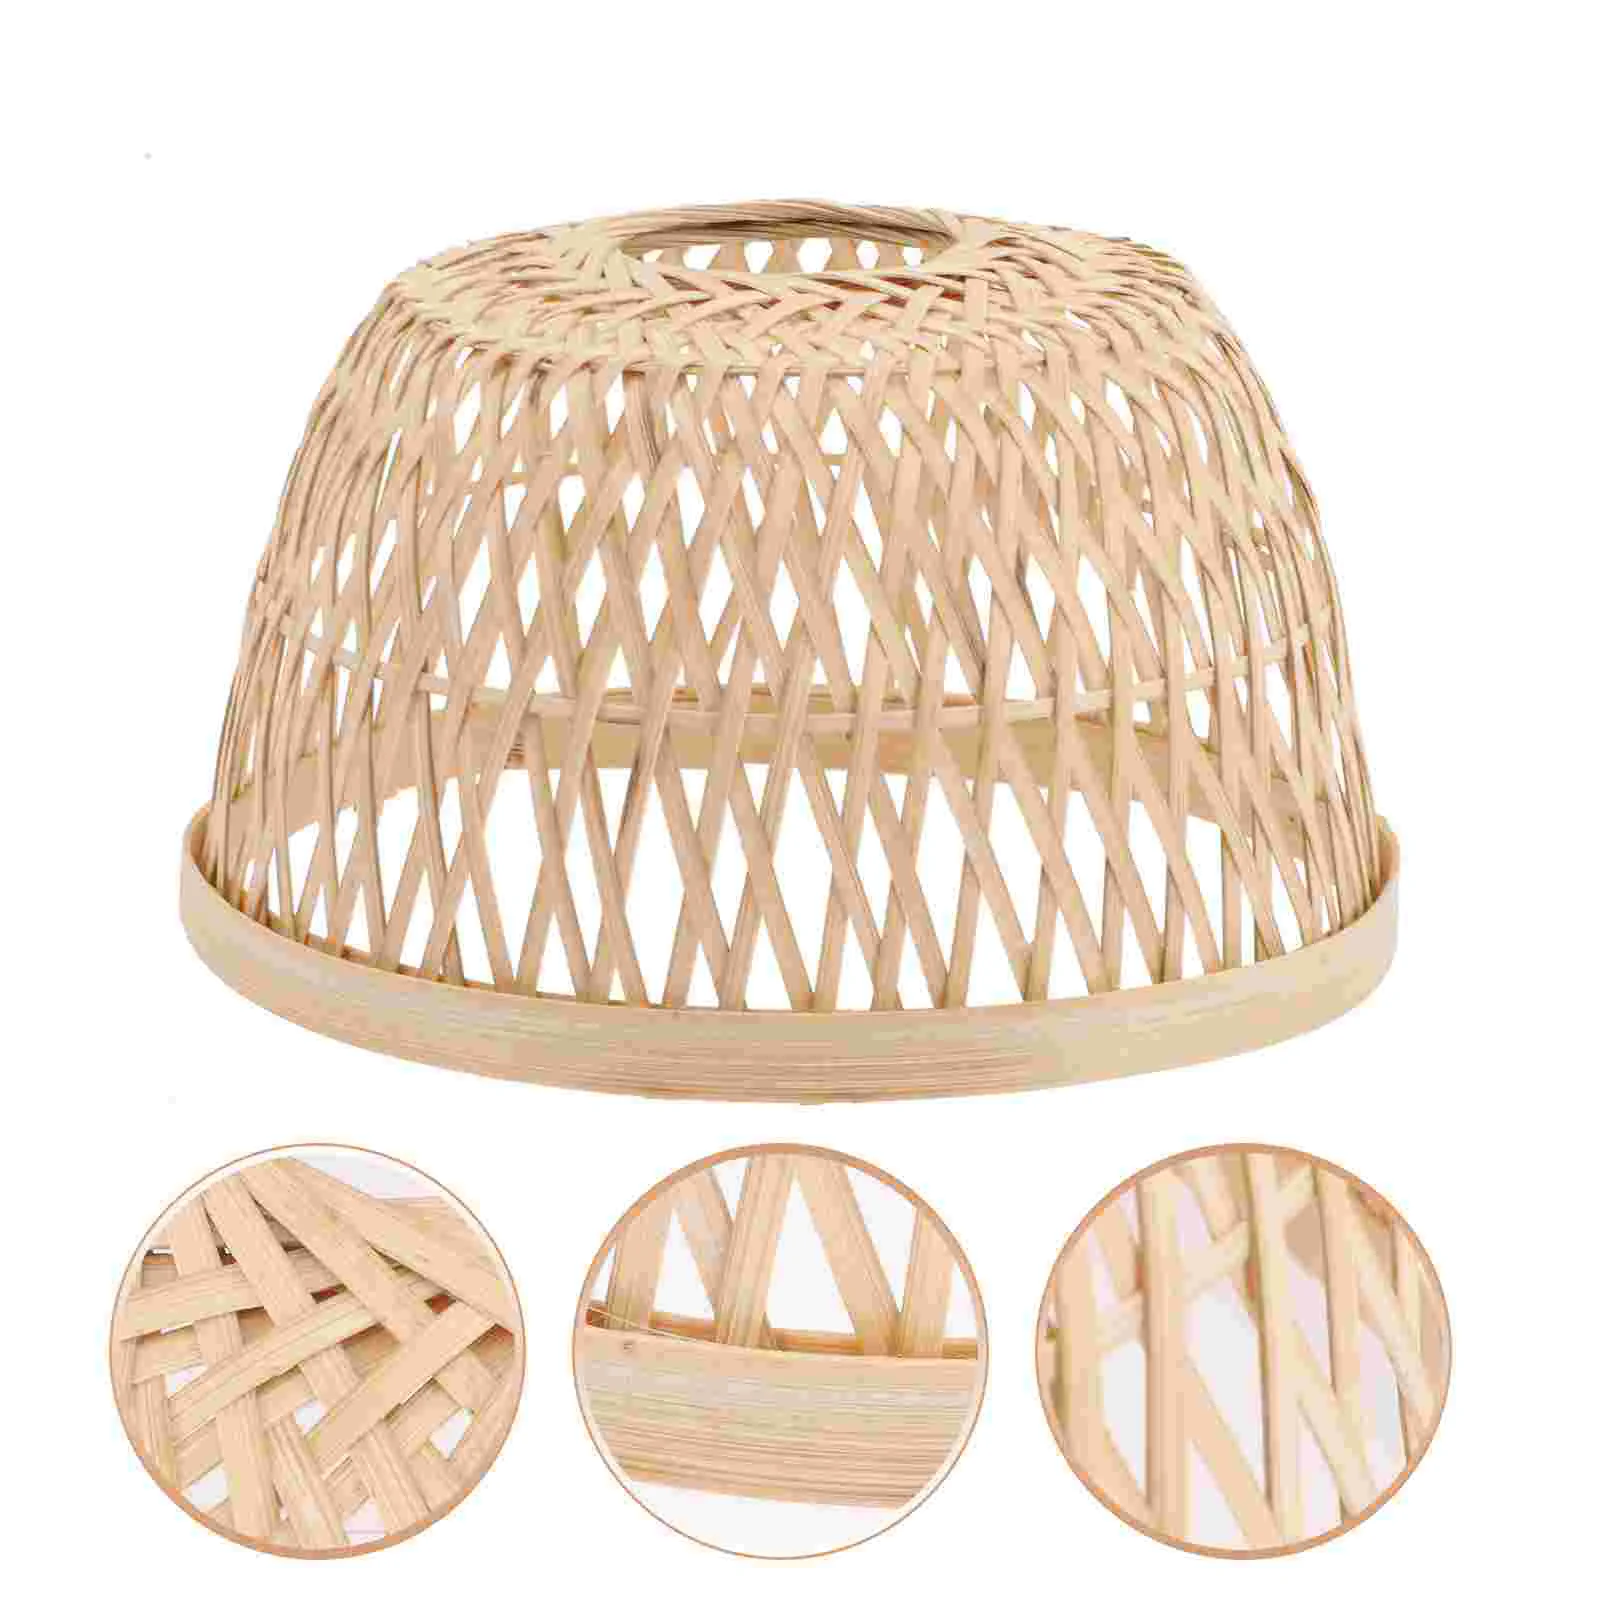 

Lampshade Hanging Cover Woven Rattan Baskets Storage Bamboo Rustic Style Light Fixture